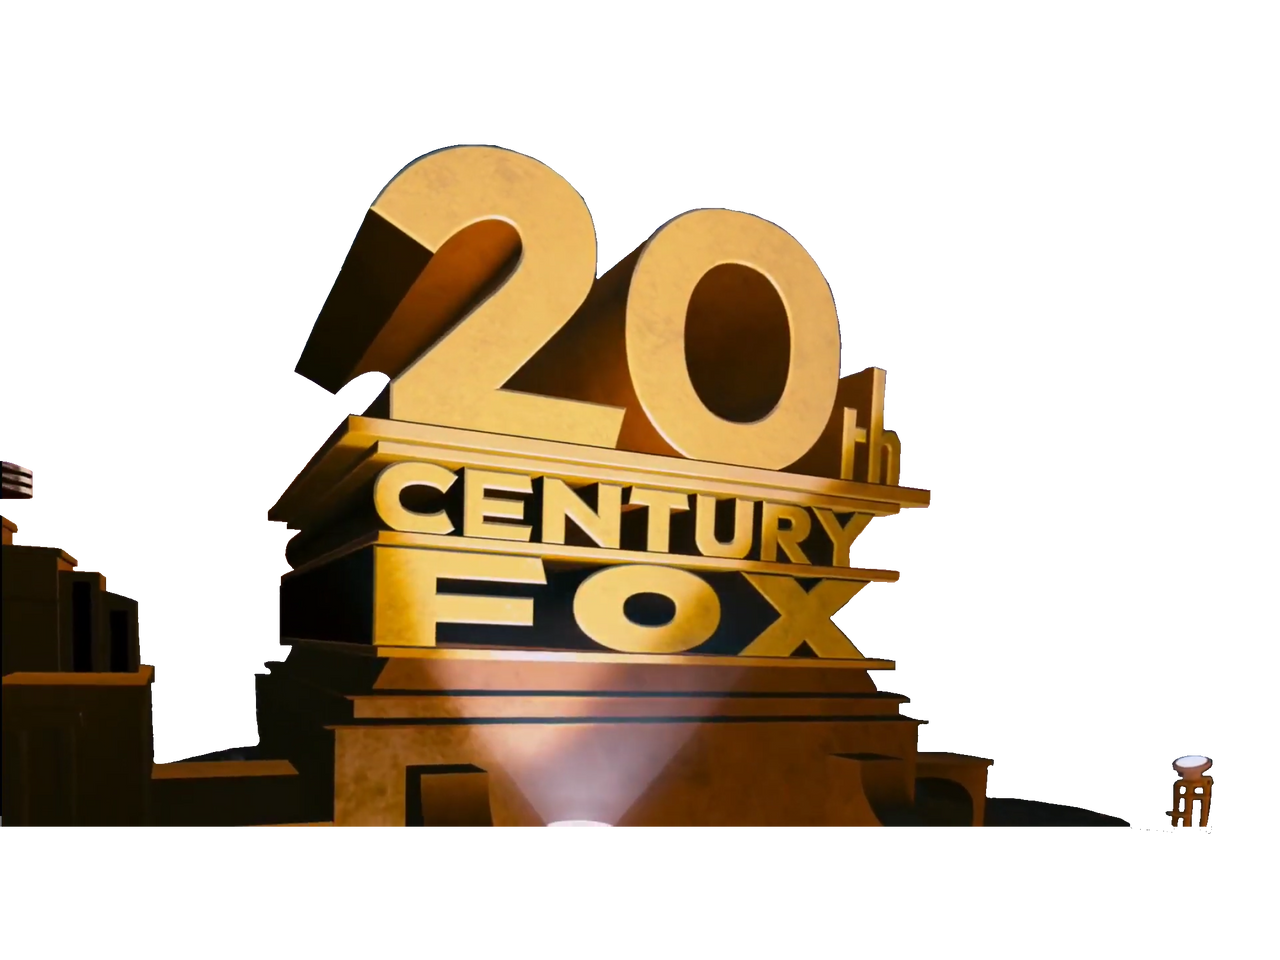 20th Century Fox 1994 Transparent Angle by Tomthedeviant2 on DeviantArt